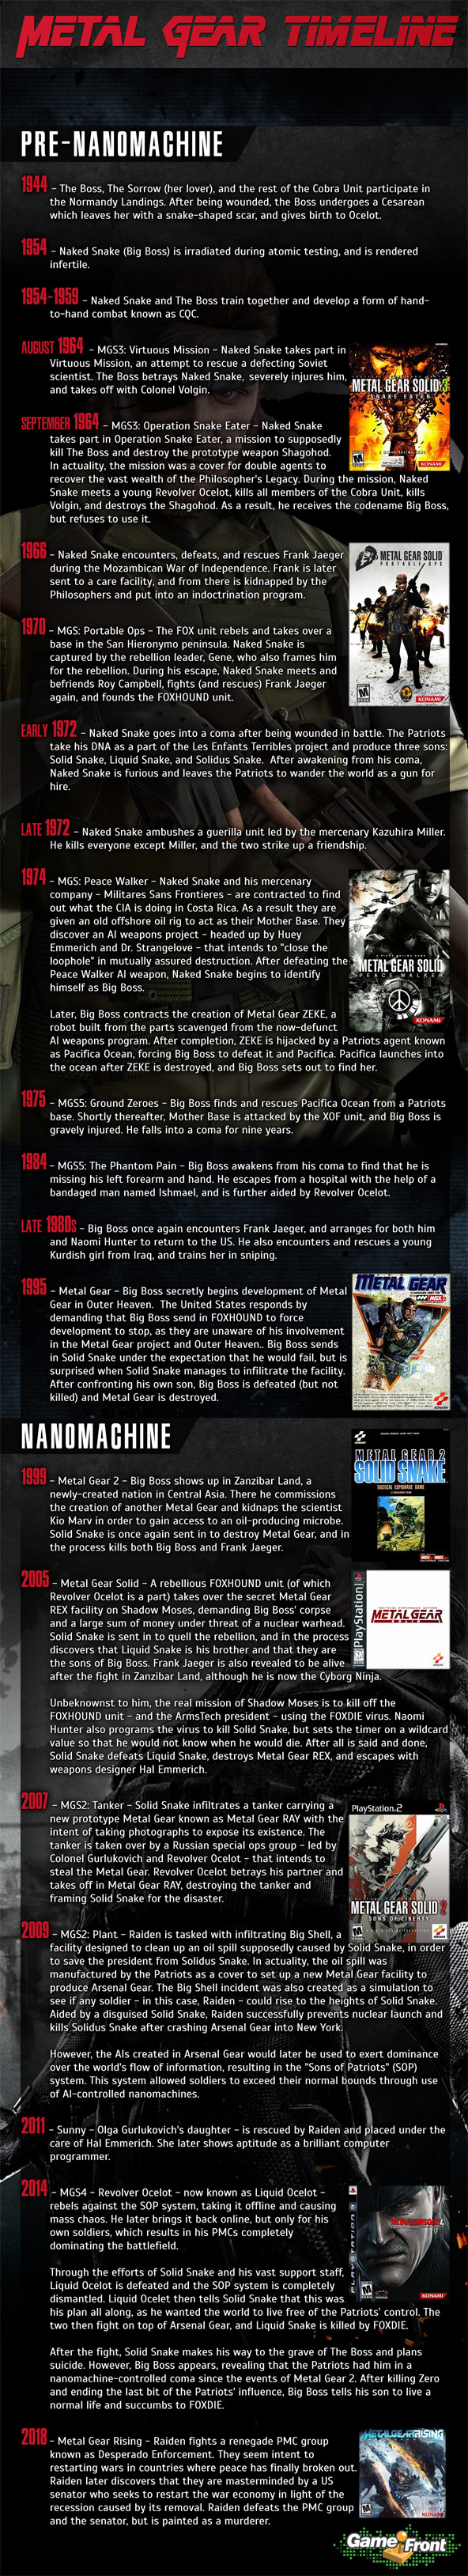 Metal Gear Timeline infographic